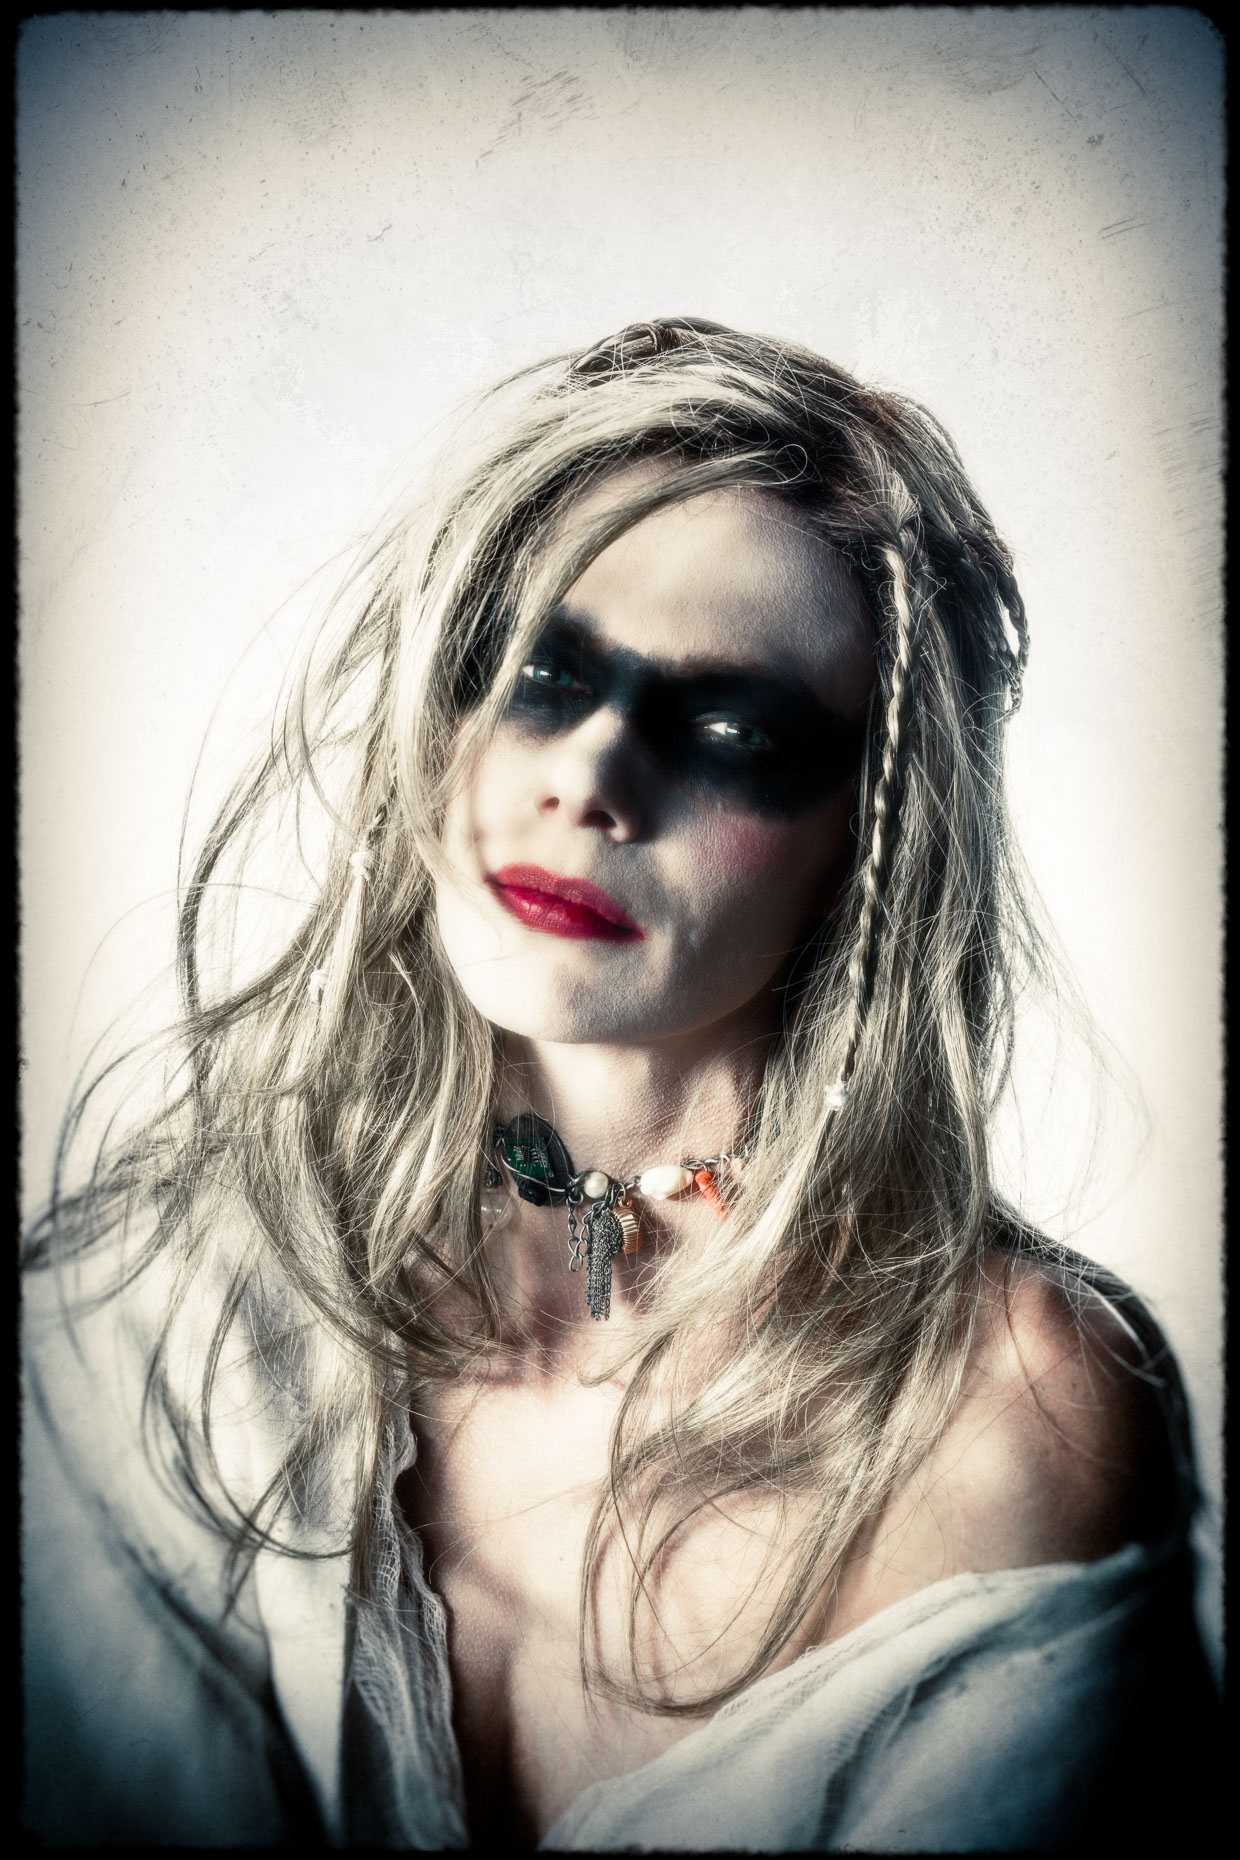 Character Portrait of actor Brandi Seymour as Isabel the Oracle, one of 9 main characters. Introducing the apocalyptic world of the Bad Choices Project, a cinematic visual screenplay and personal project by Andy Batt.